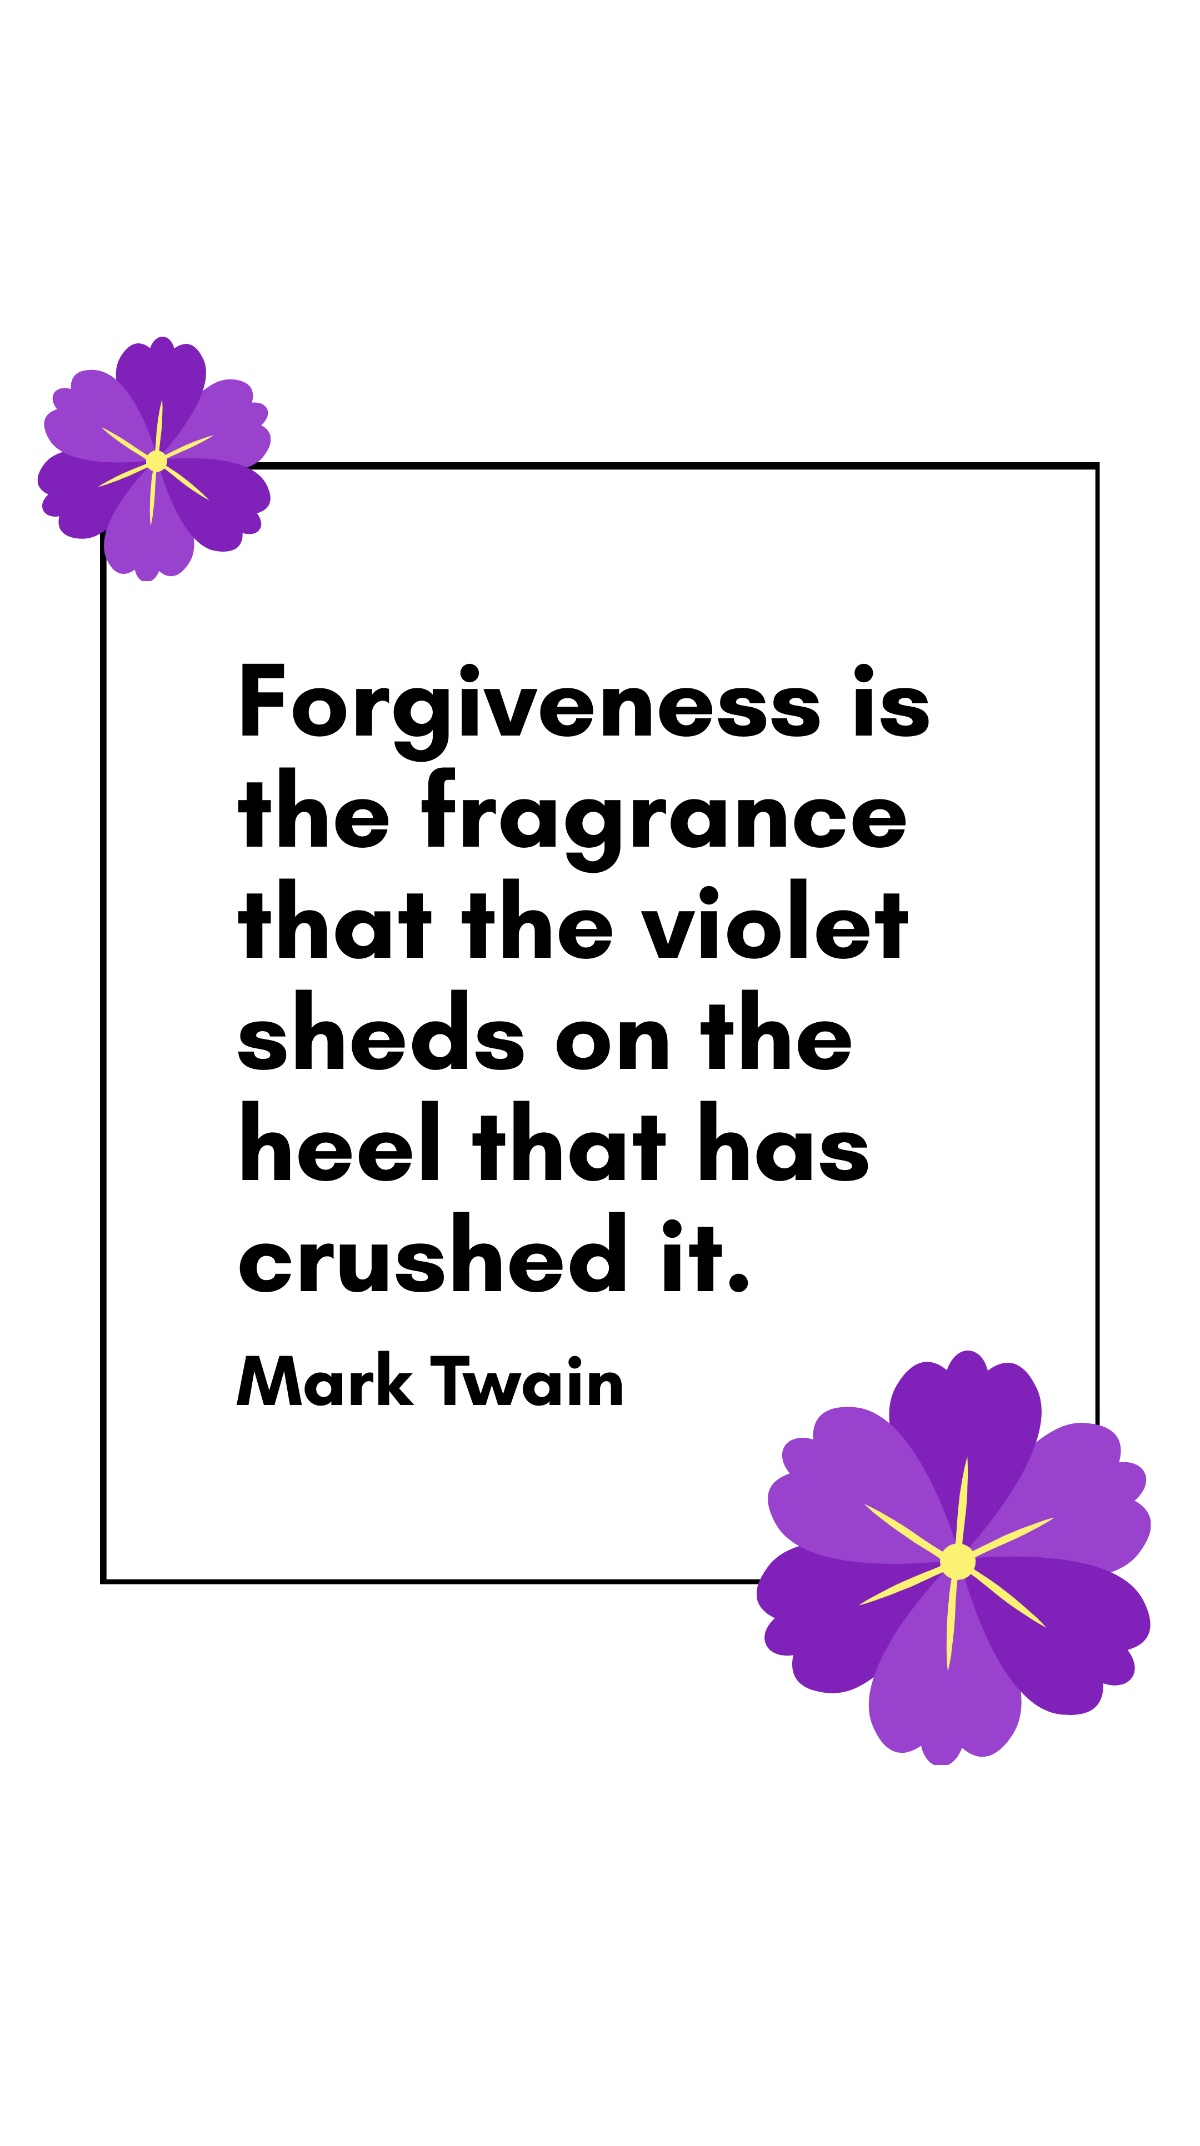 Free Mark Twain - Forgiveness is the fragrance that the violet sheds on the heel that has crushed it. Template